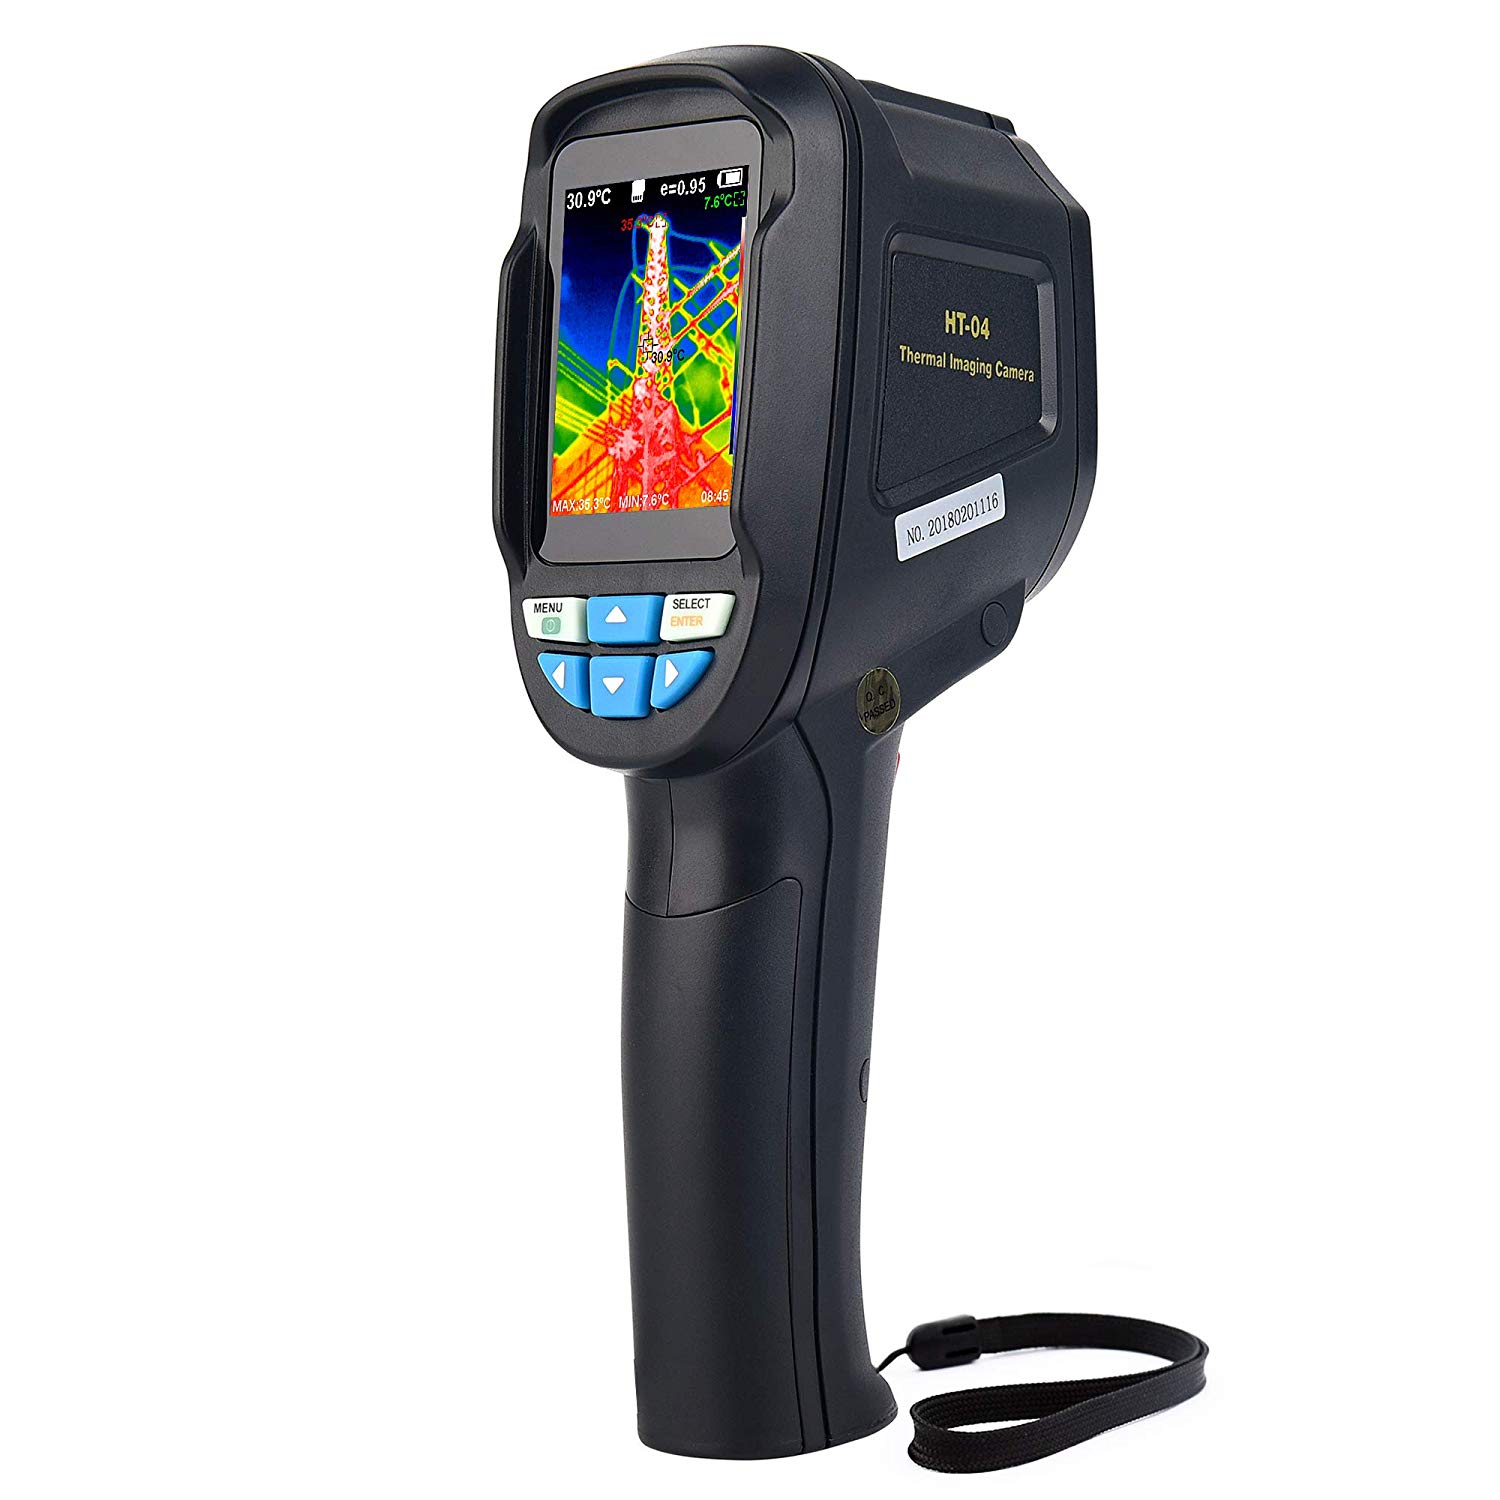 Handheld Infrared Thermal Imaging Inspection Camera 220x160 Resolution 2.8" LCD 